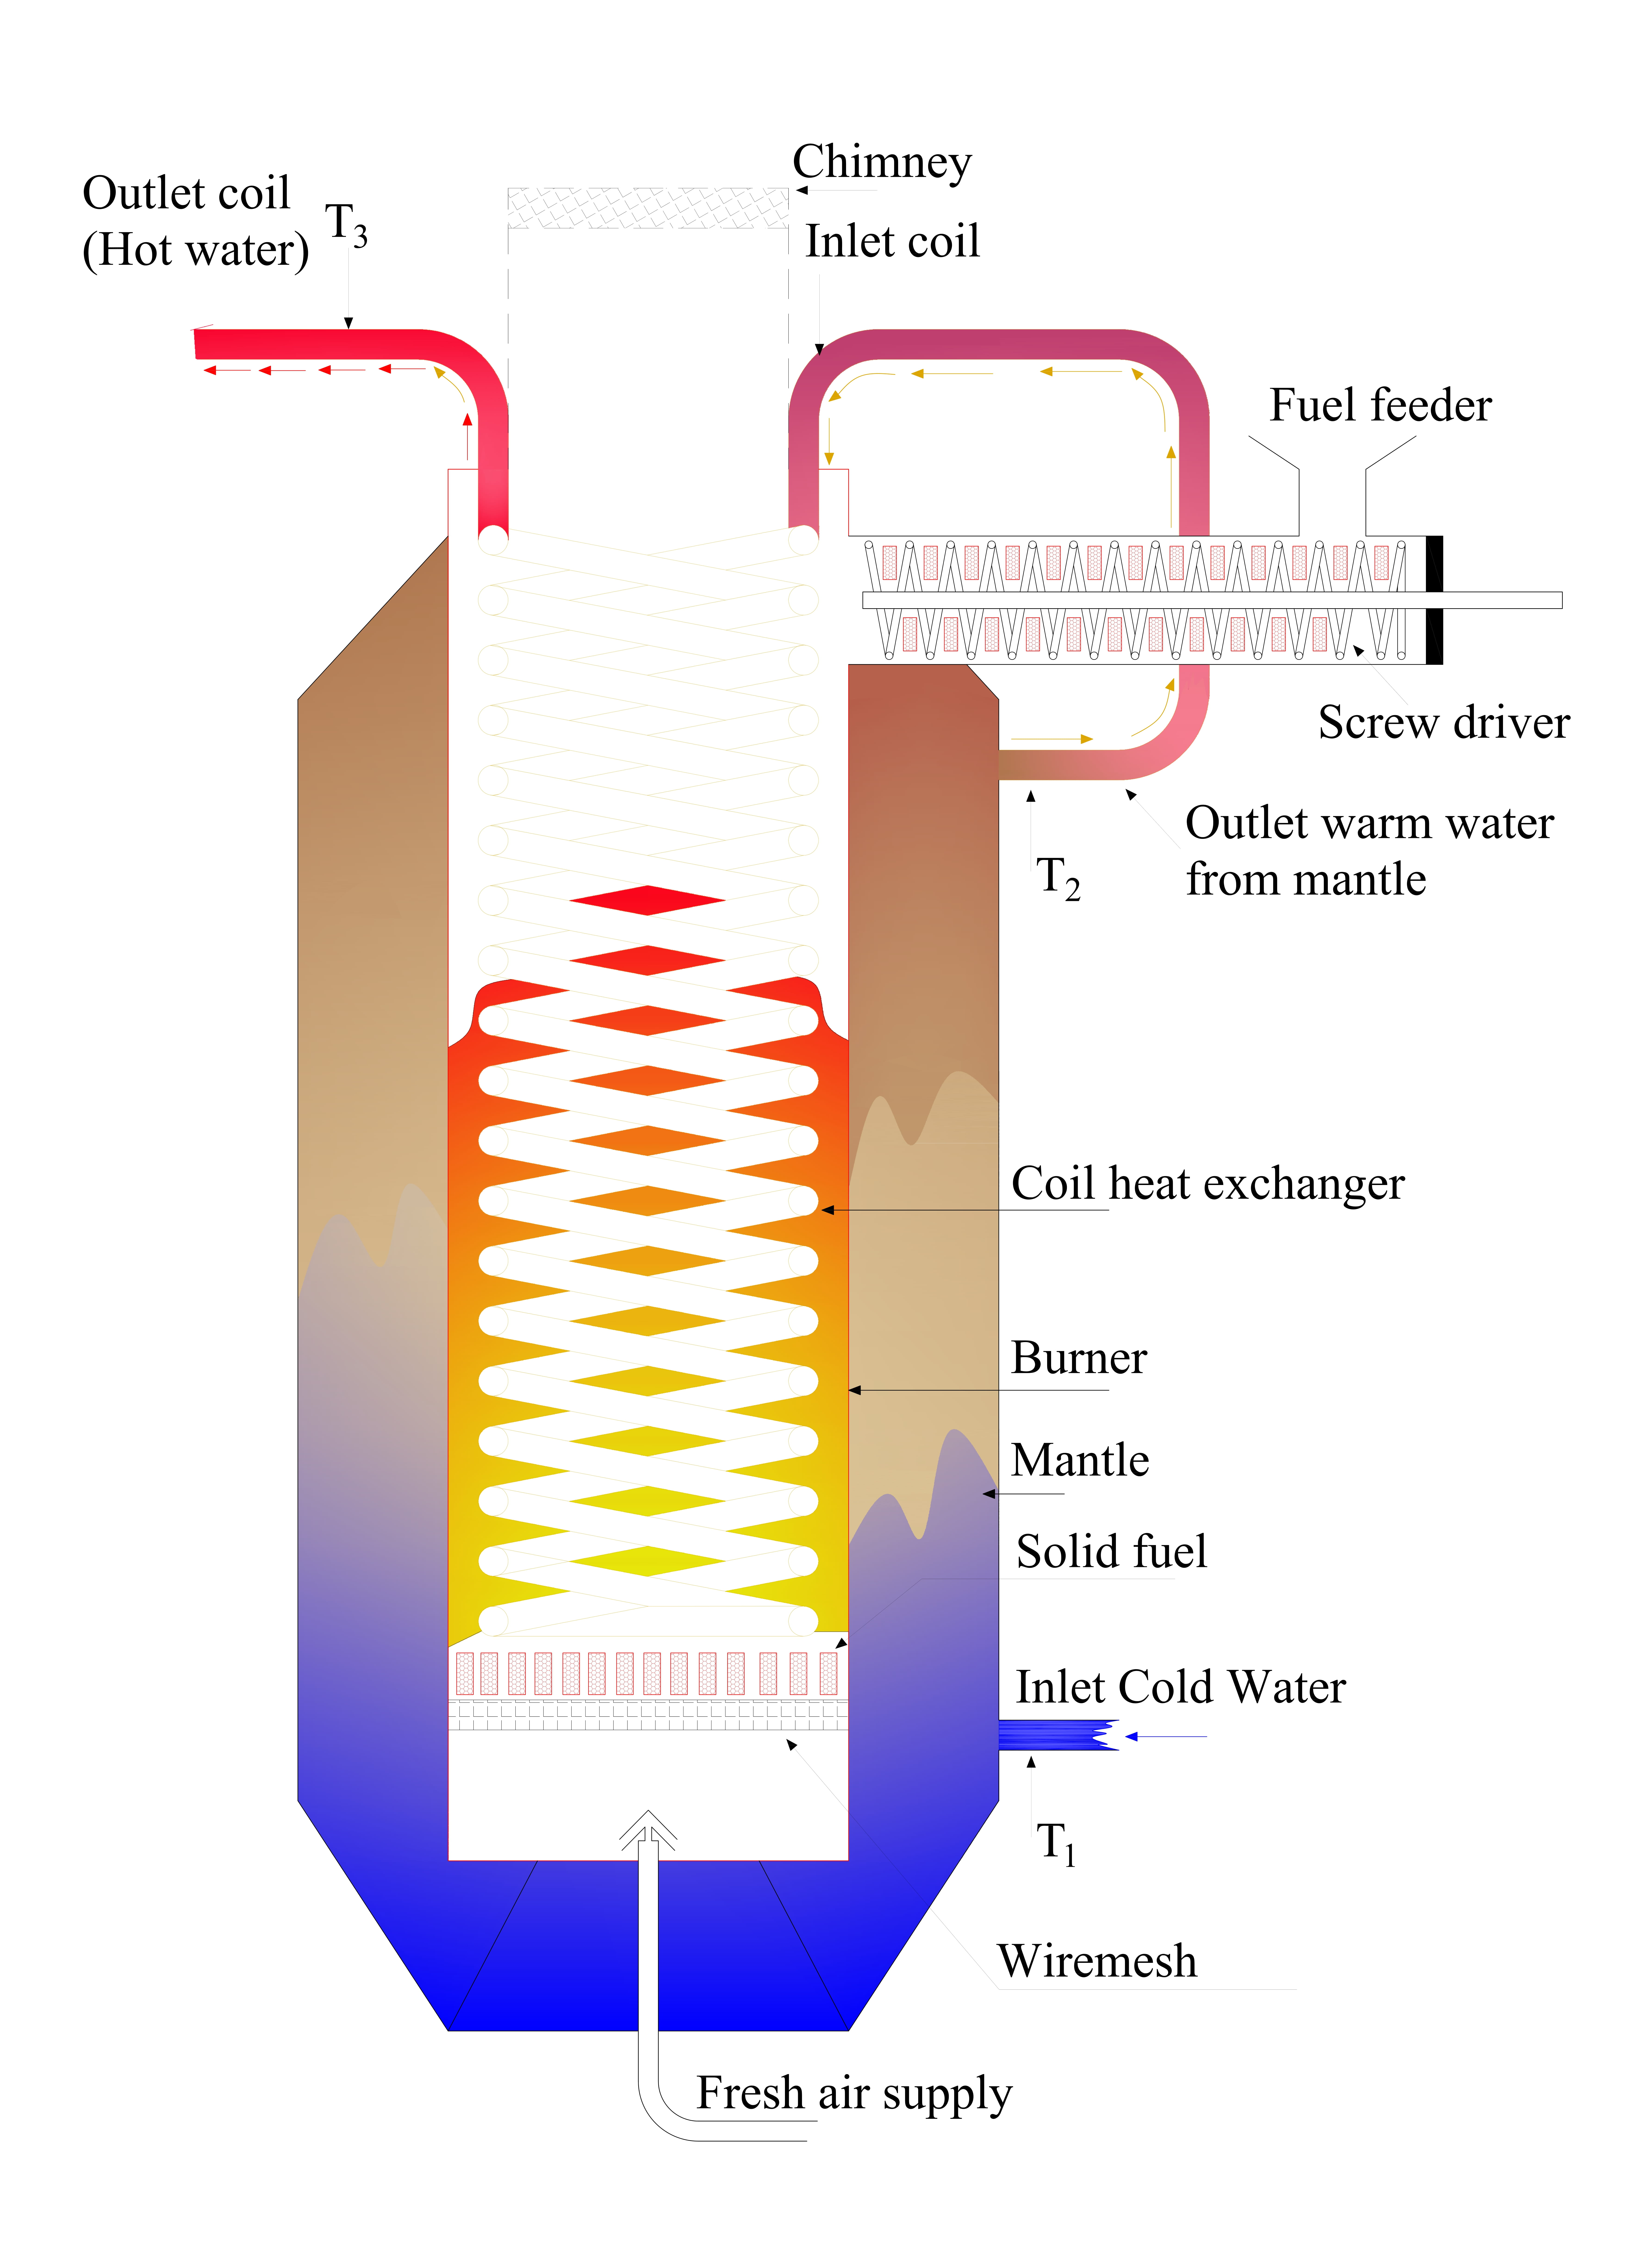 Increasing the reliability of biomass solid fuel combustion using a combined regenerative heat exchanger as an indirect burner 